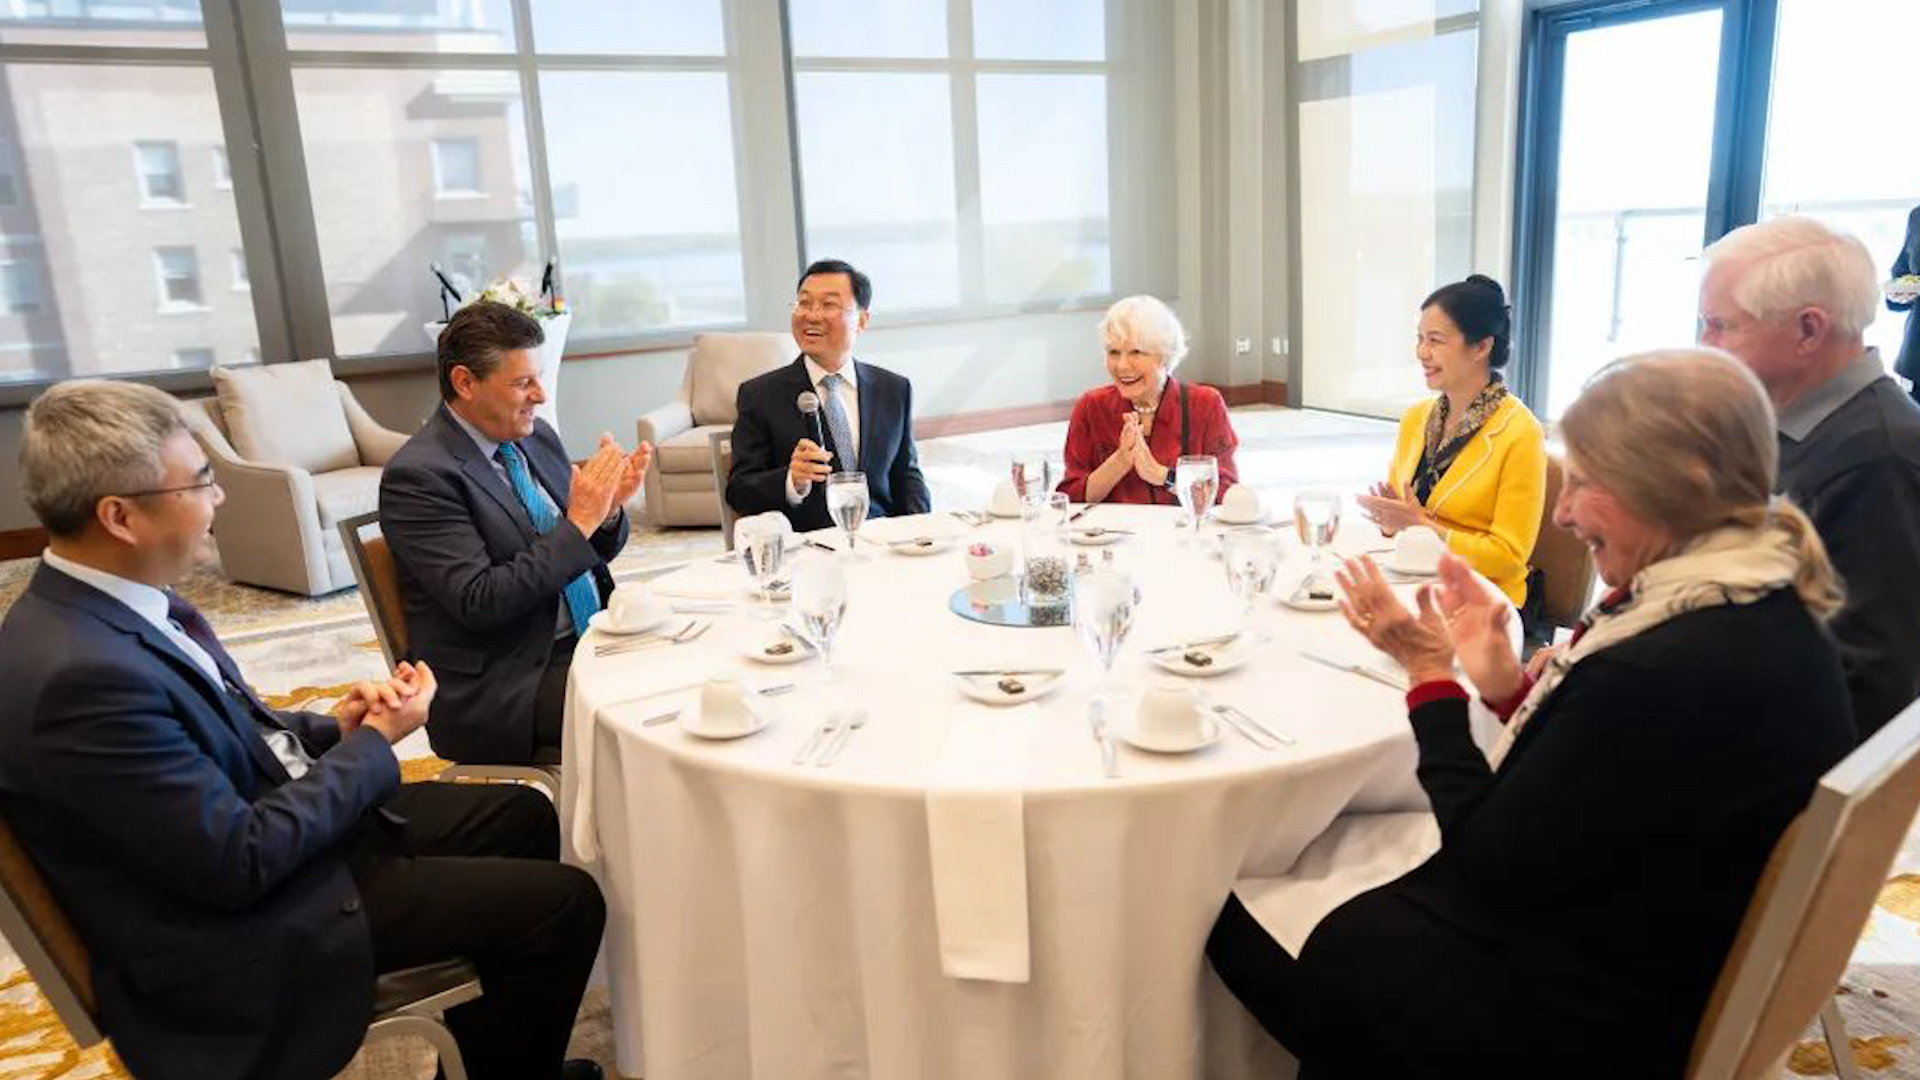 Ambassador Xie Feng discusses China-U.S. relations during his visit to Iowa  